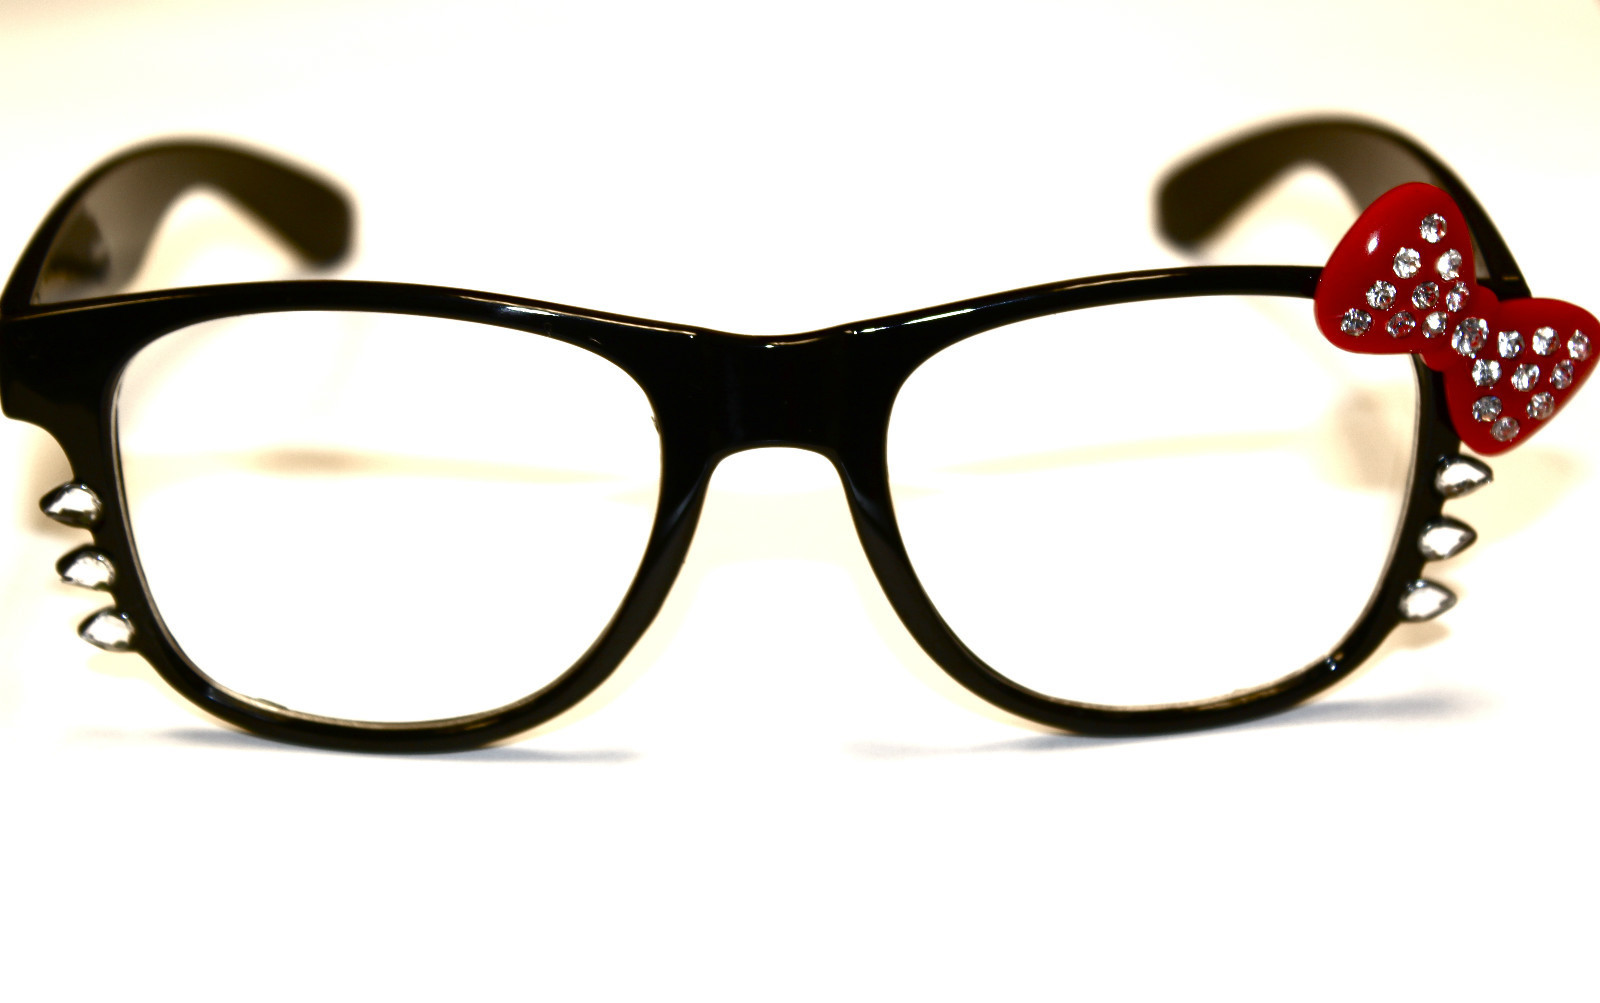 Geek glasses clipart nerd black with white free